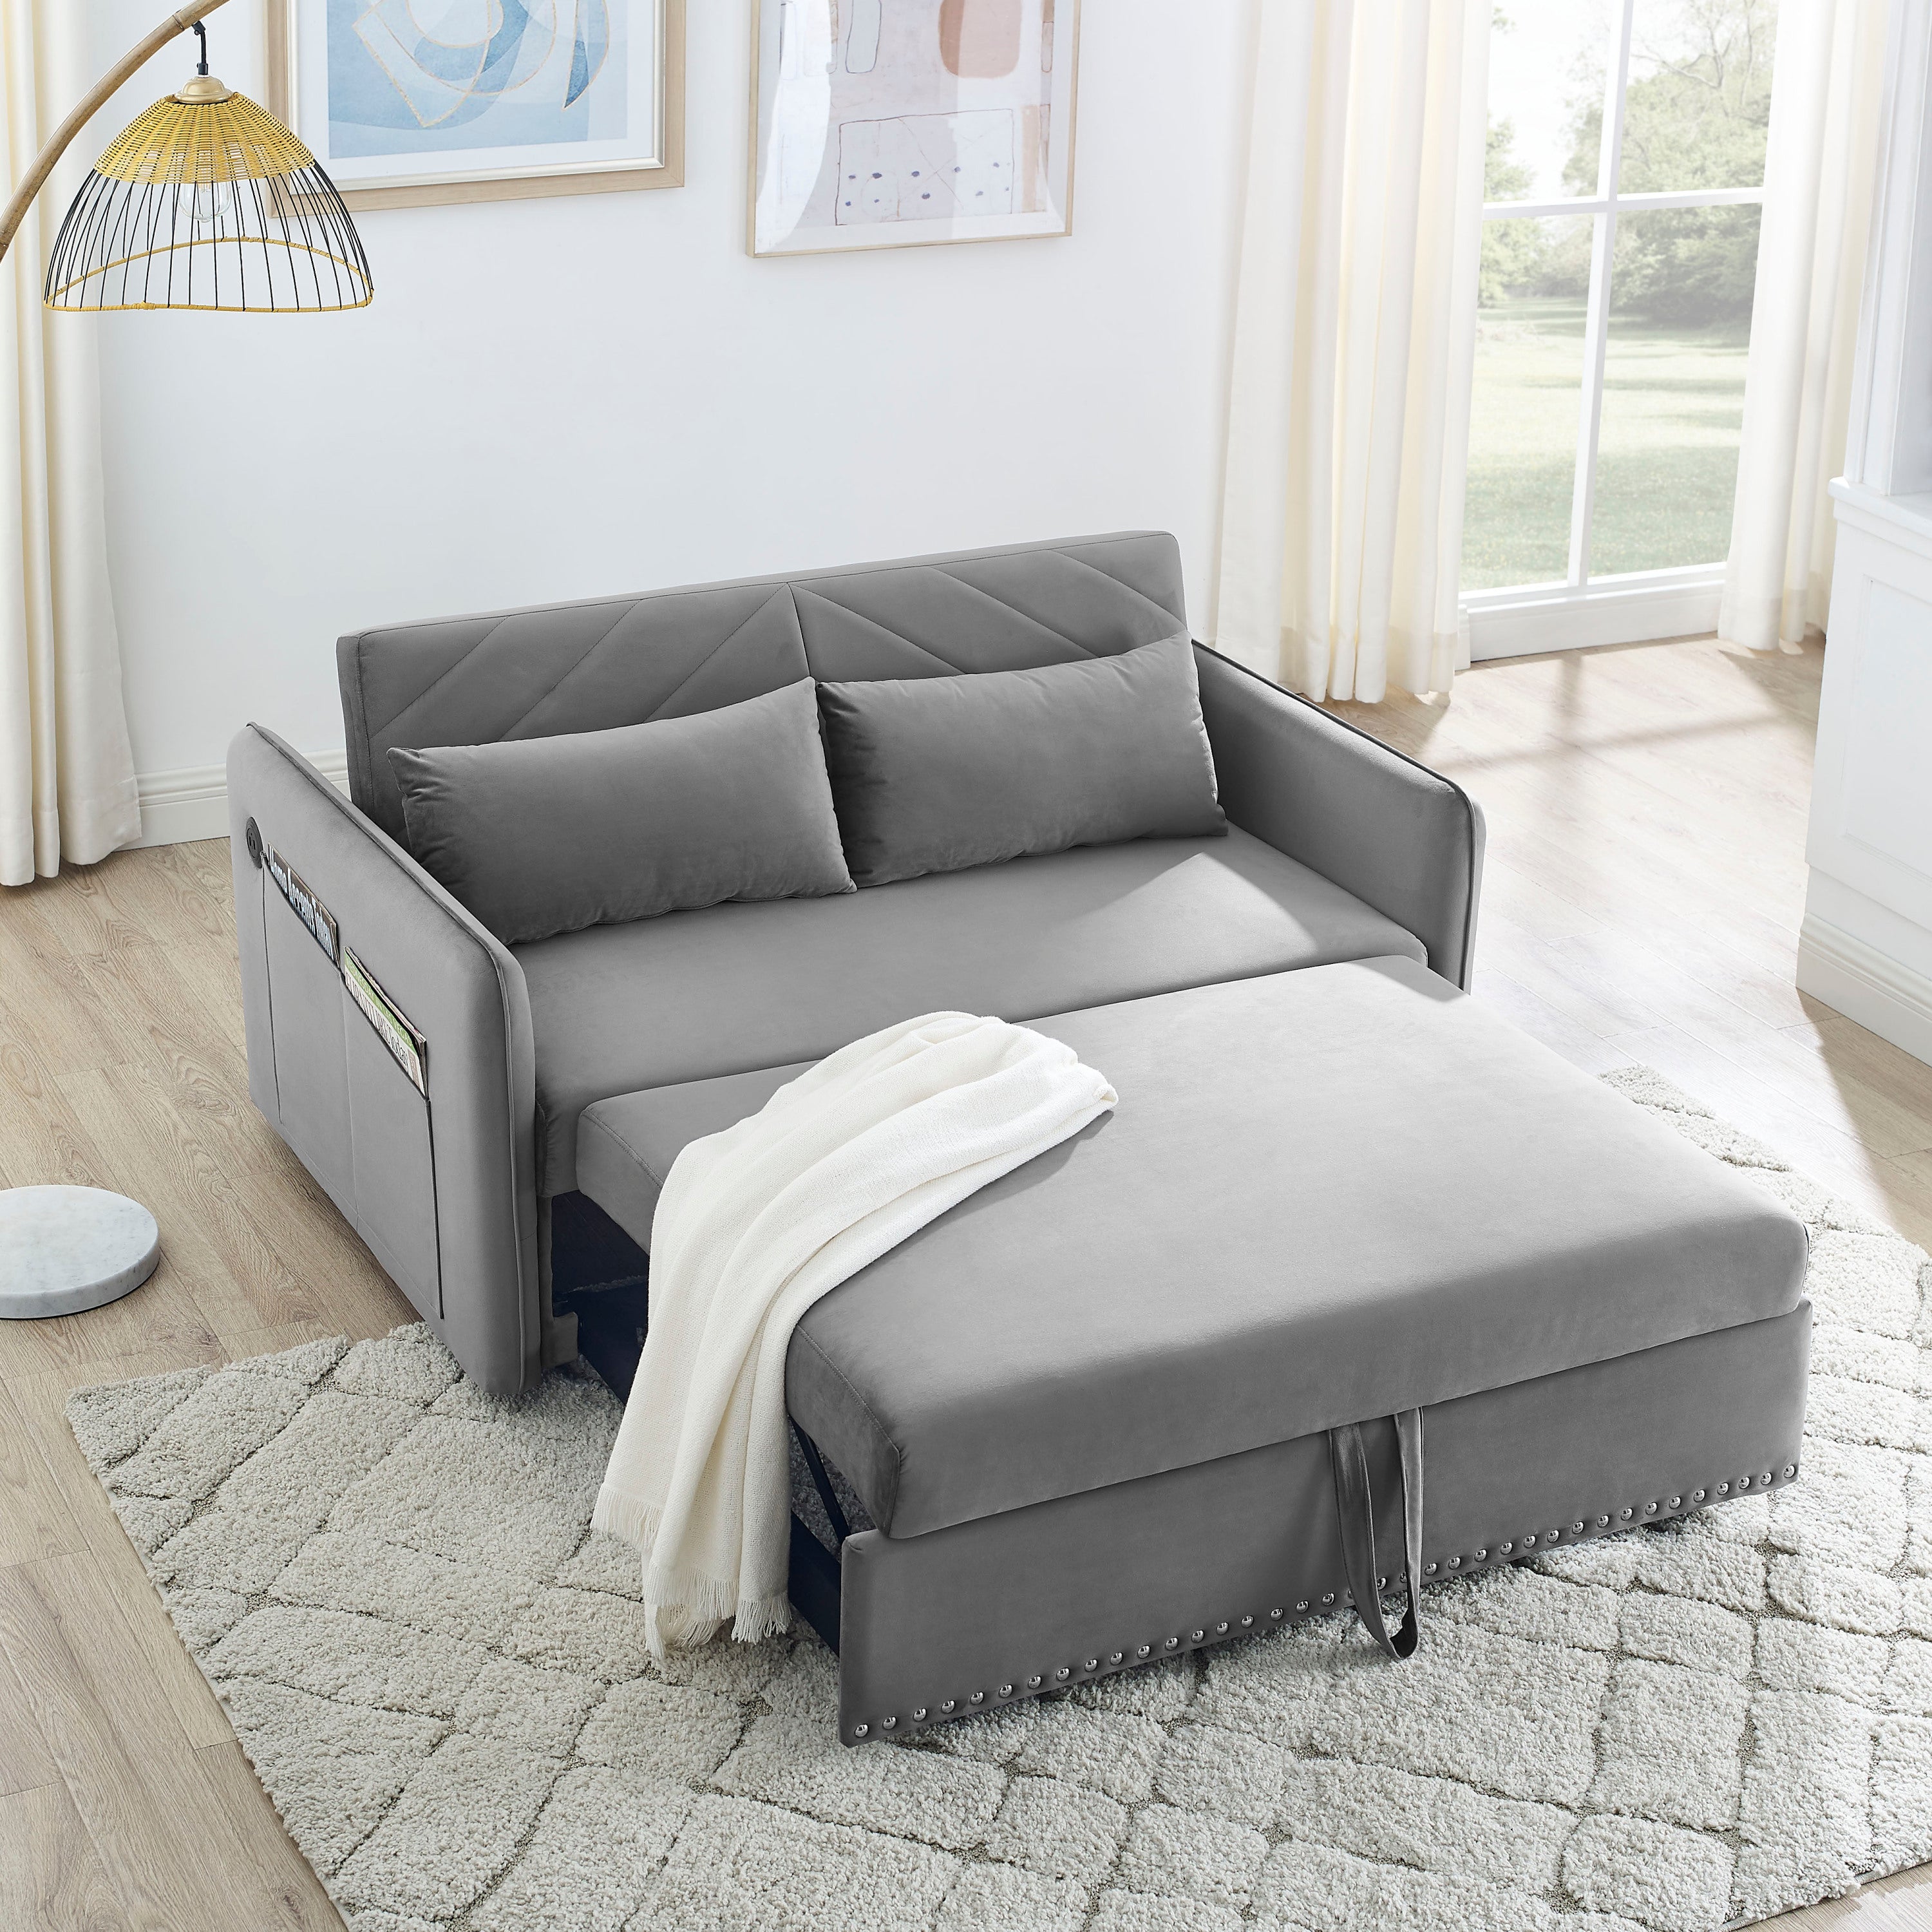 🆓🚛 3-In-1 Adjustable Sleeper With Pull-Out Bed, 2 Lumbar Pillows and Side Pocket, Soft Velvet Convertible Sleeper Sofa Bed, Gray